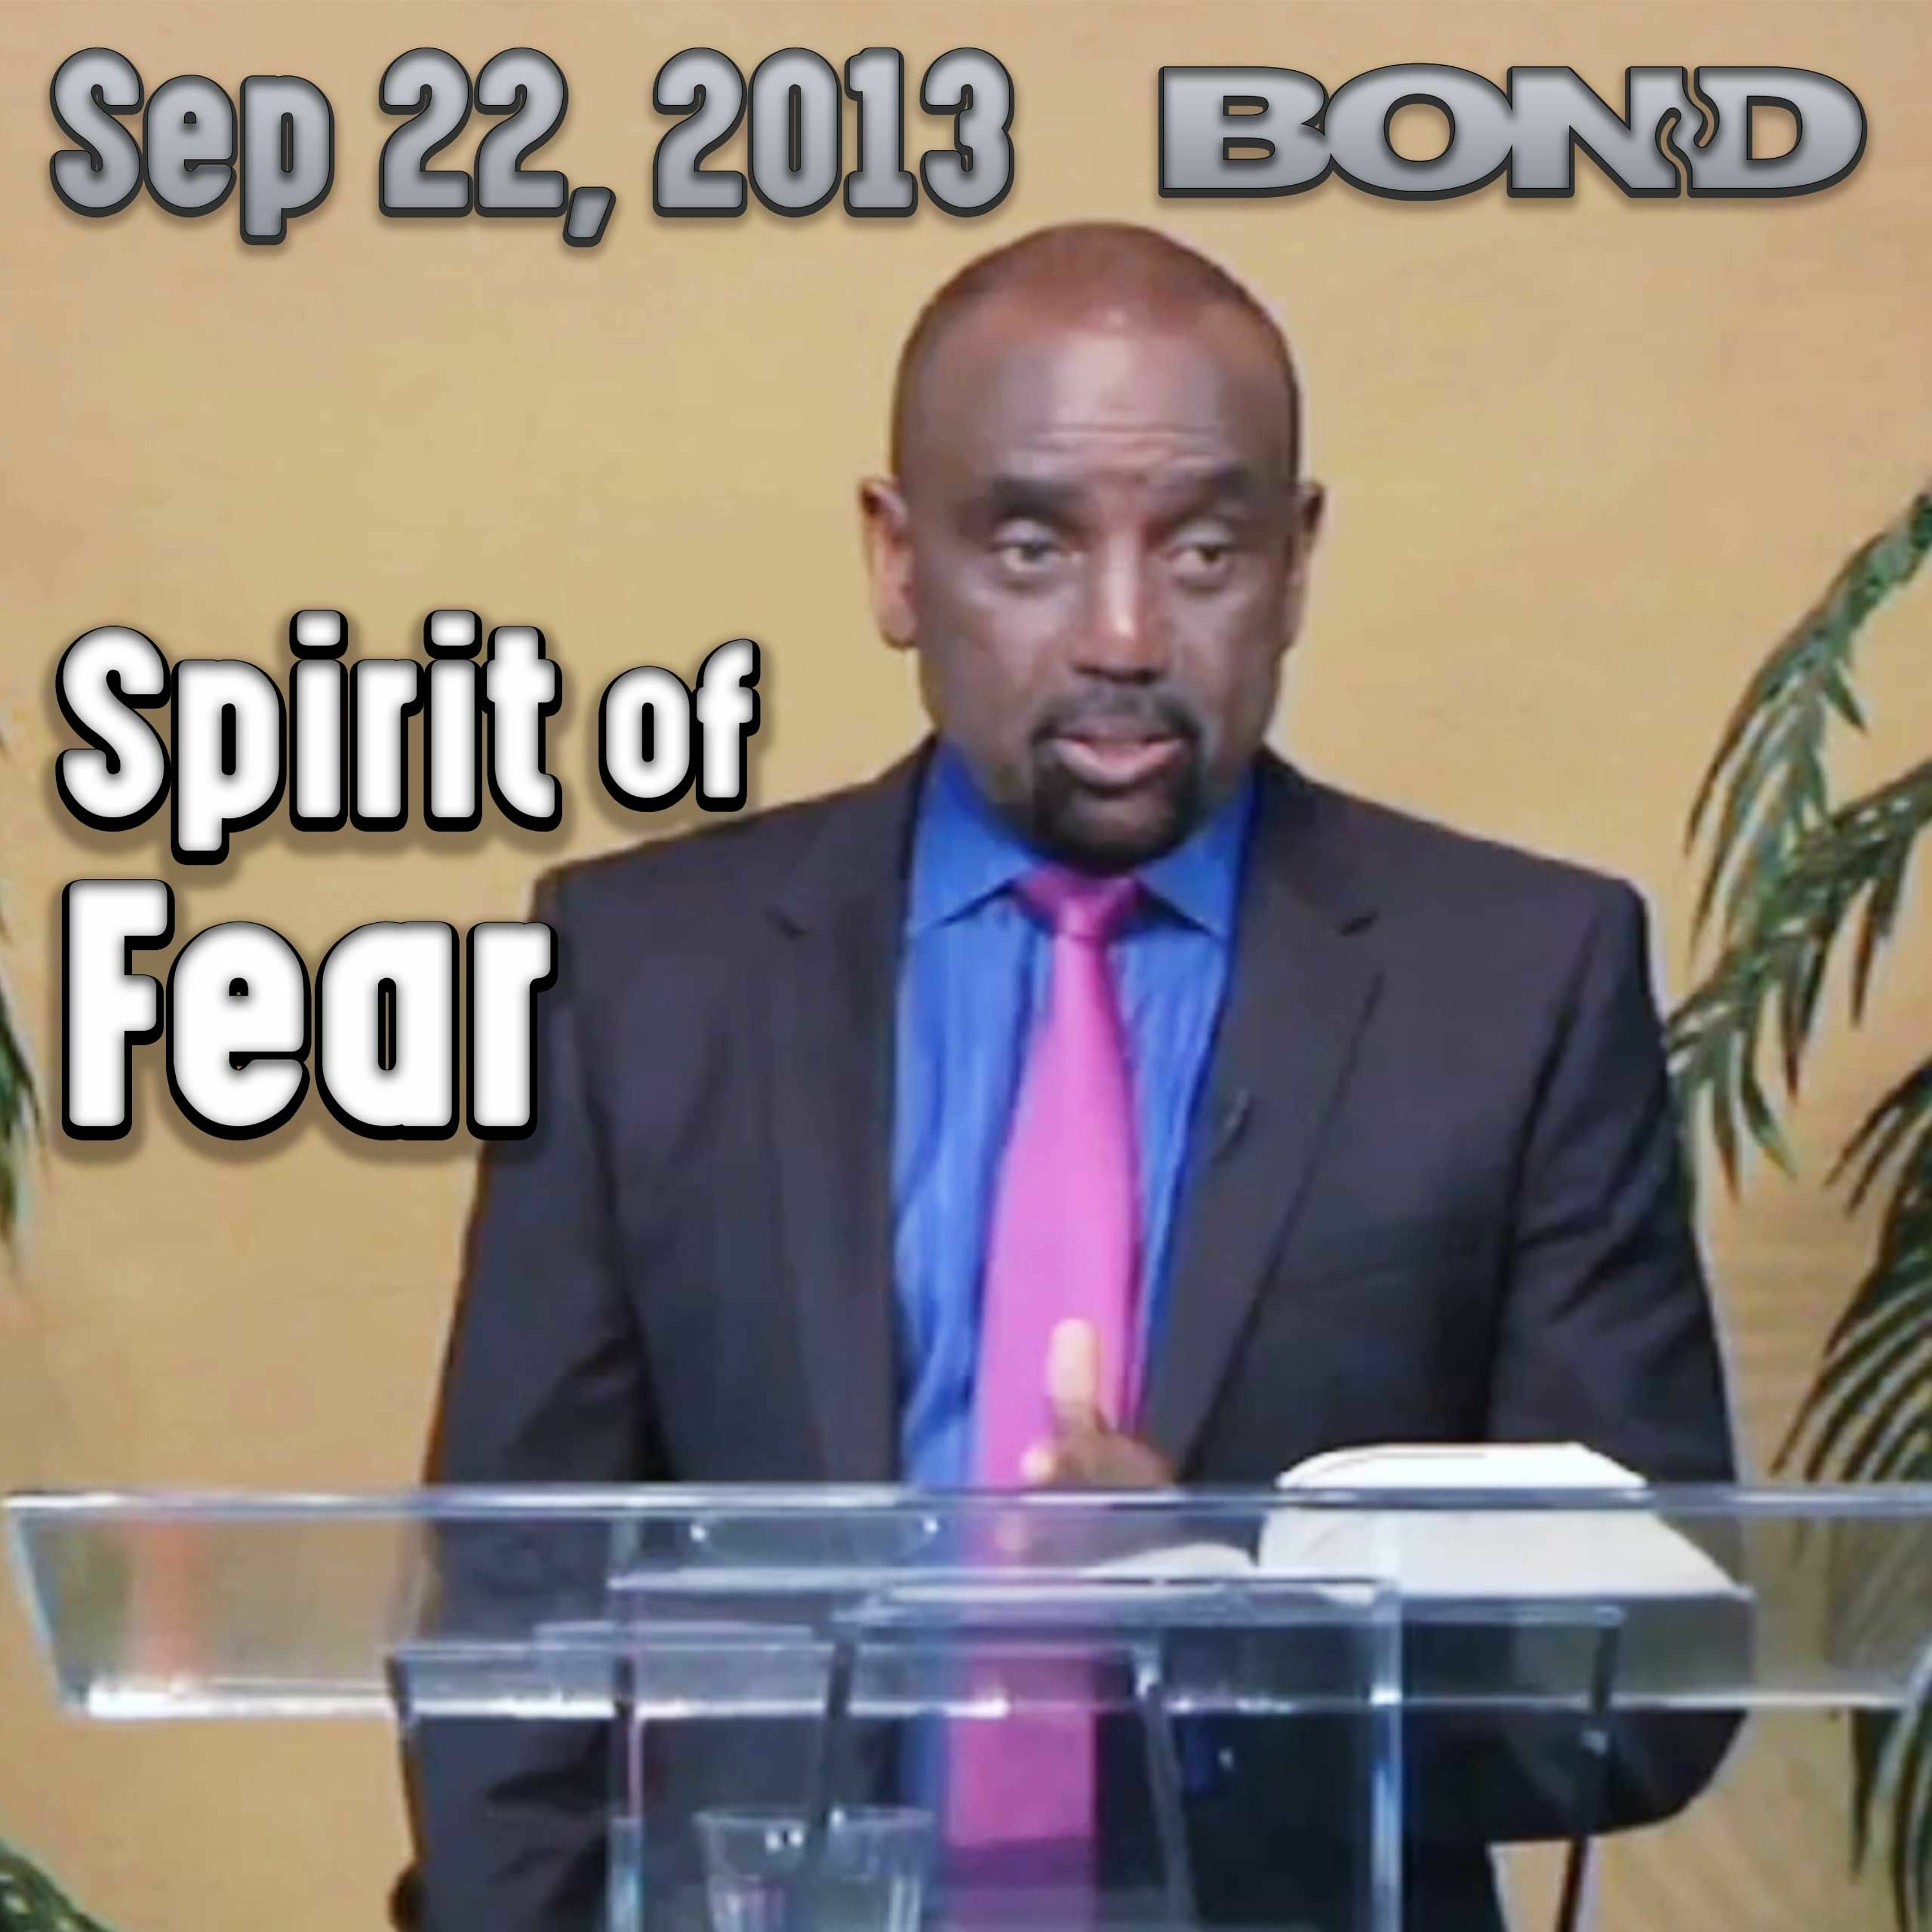 How Did You Become a Fearful Person? (Archive 9/22/13)